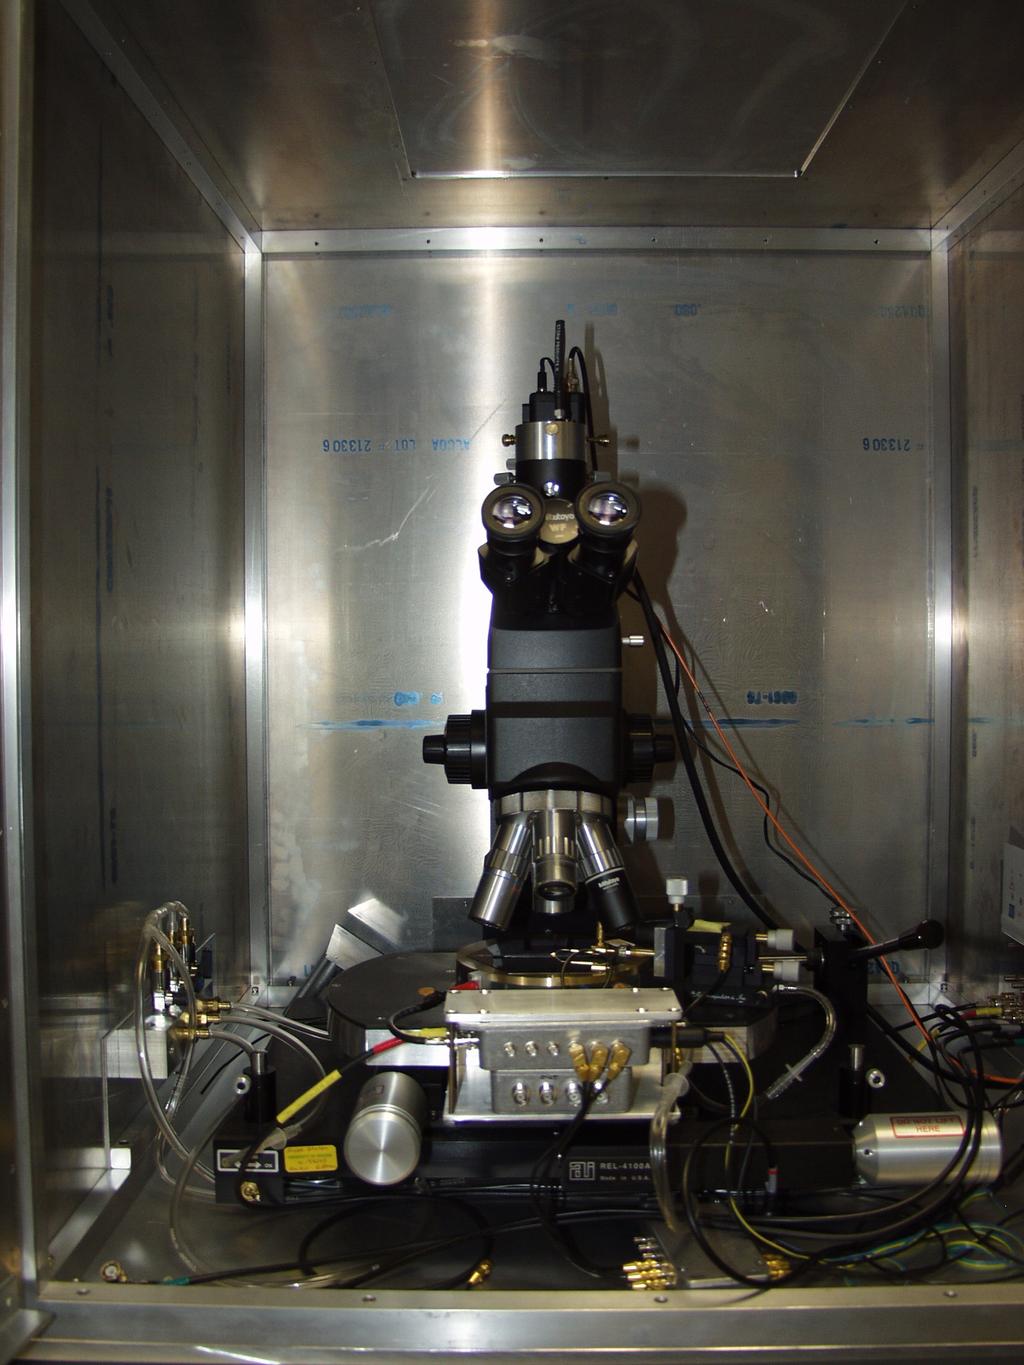 Test Setup for Cosmics, Sources and Laser Modified probe station, allows laser to be target on entire detector IR microscope